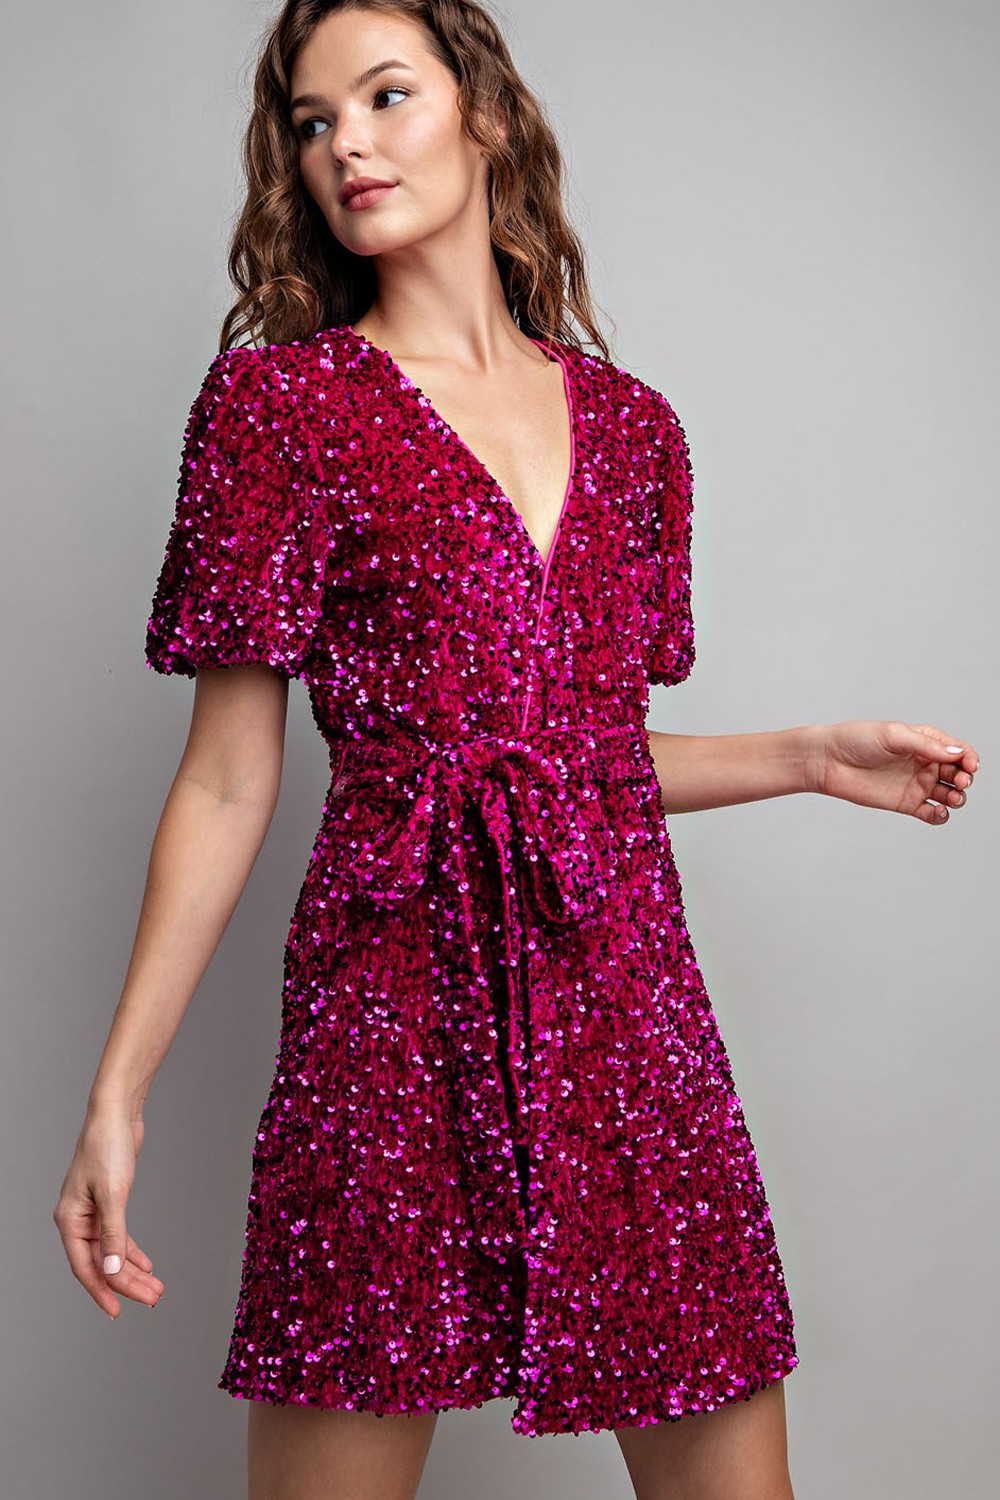 Tracy Hot Pink Sequin Dress